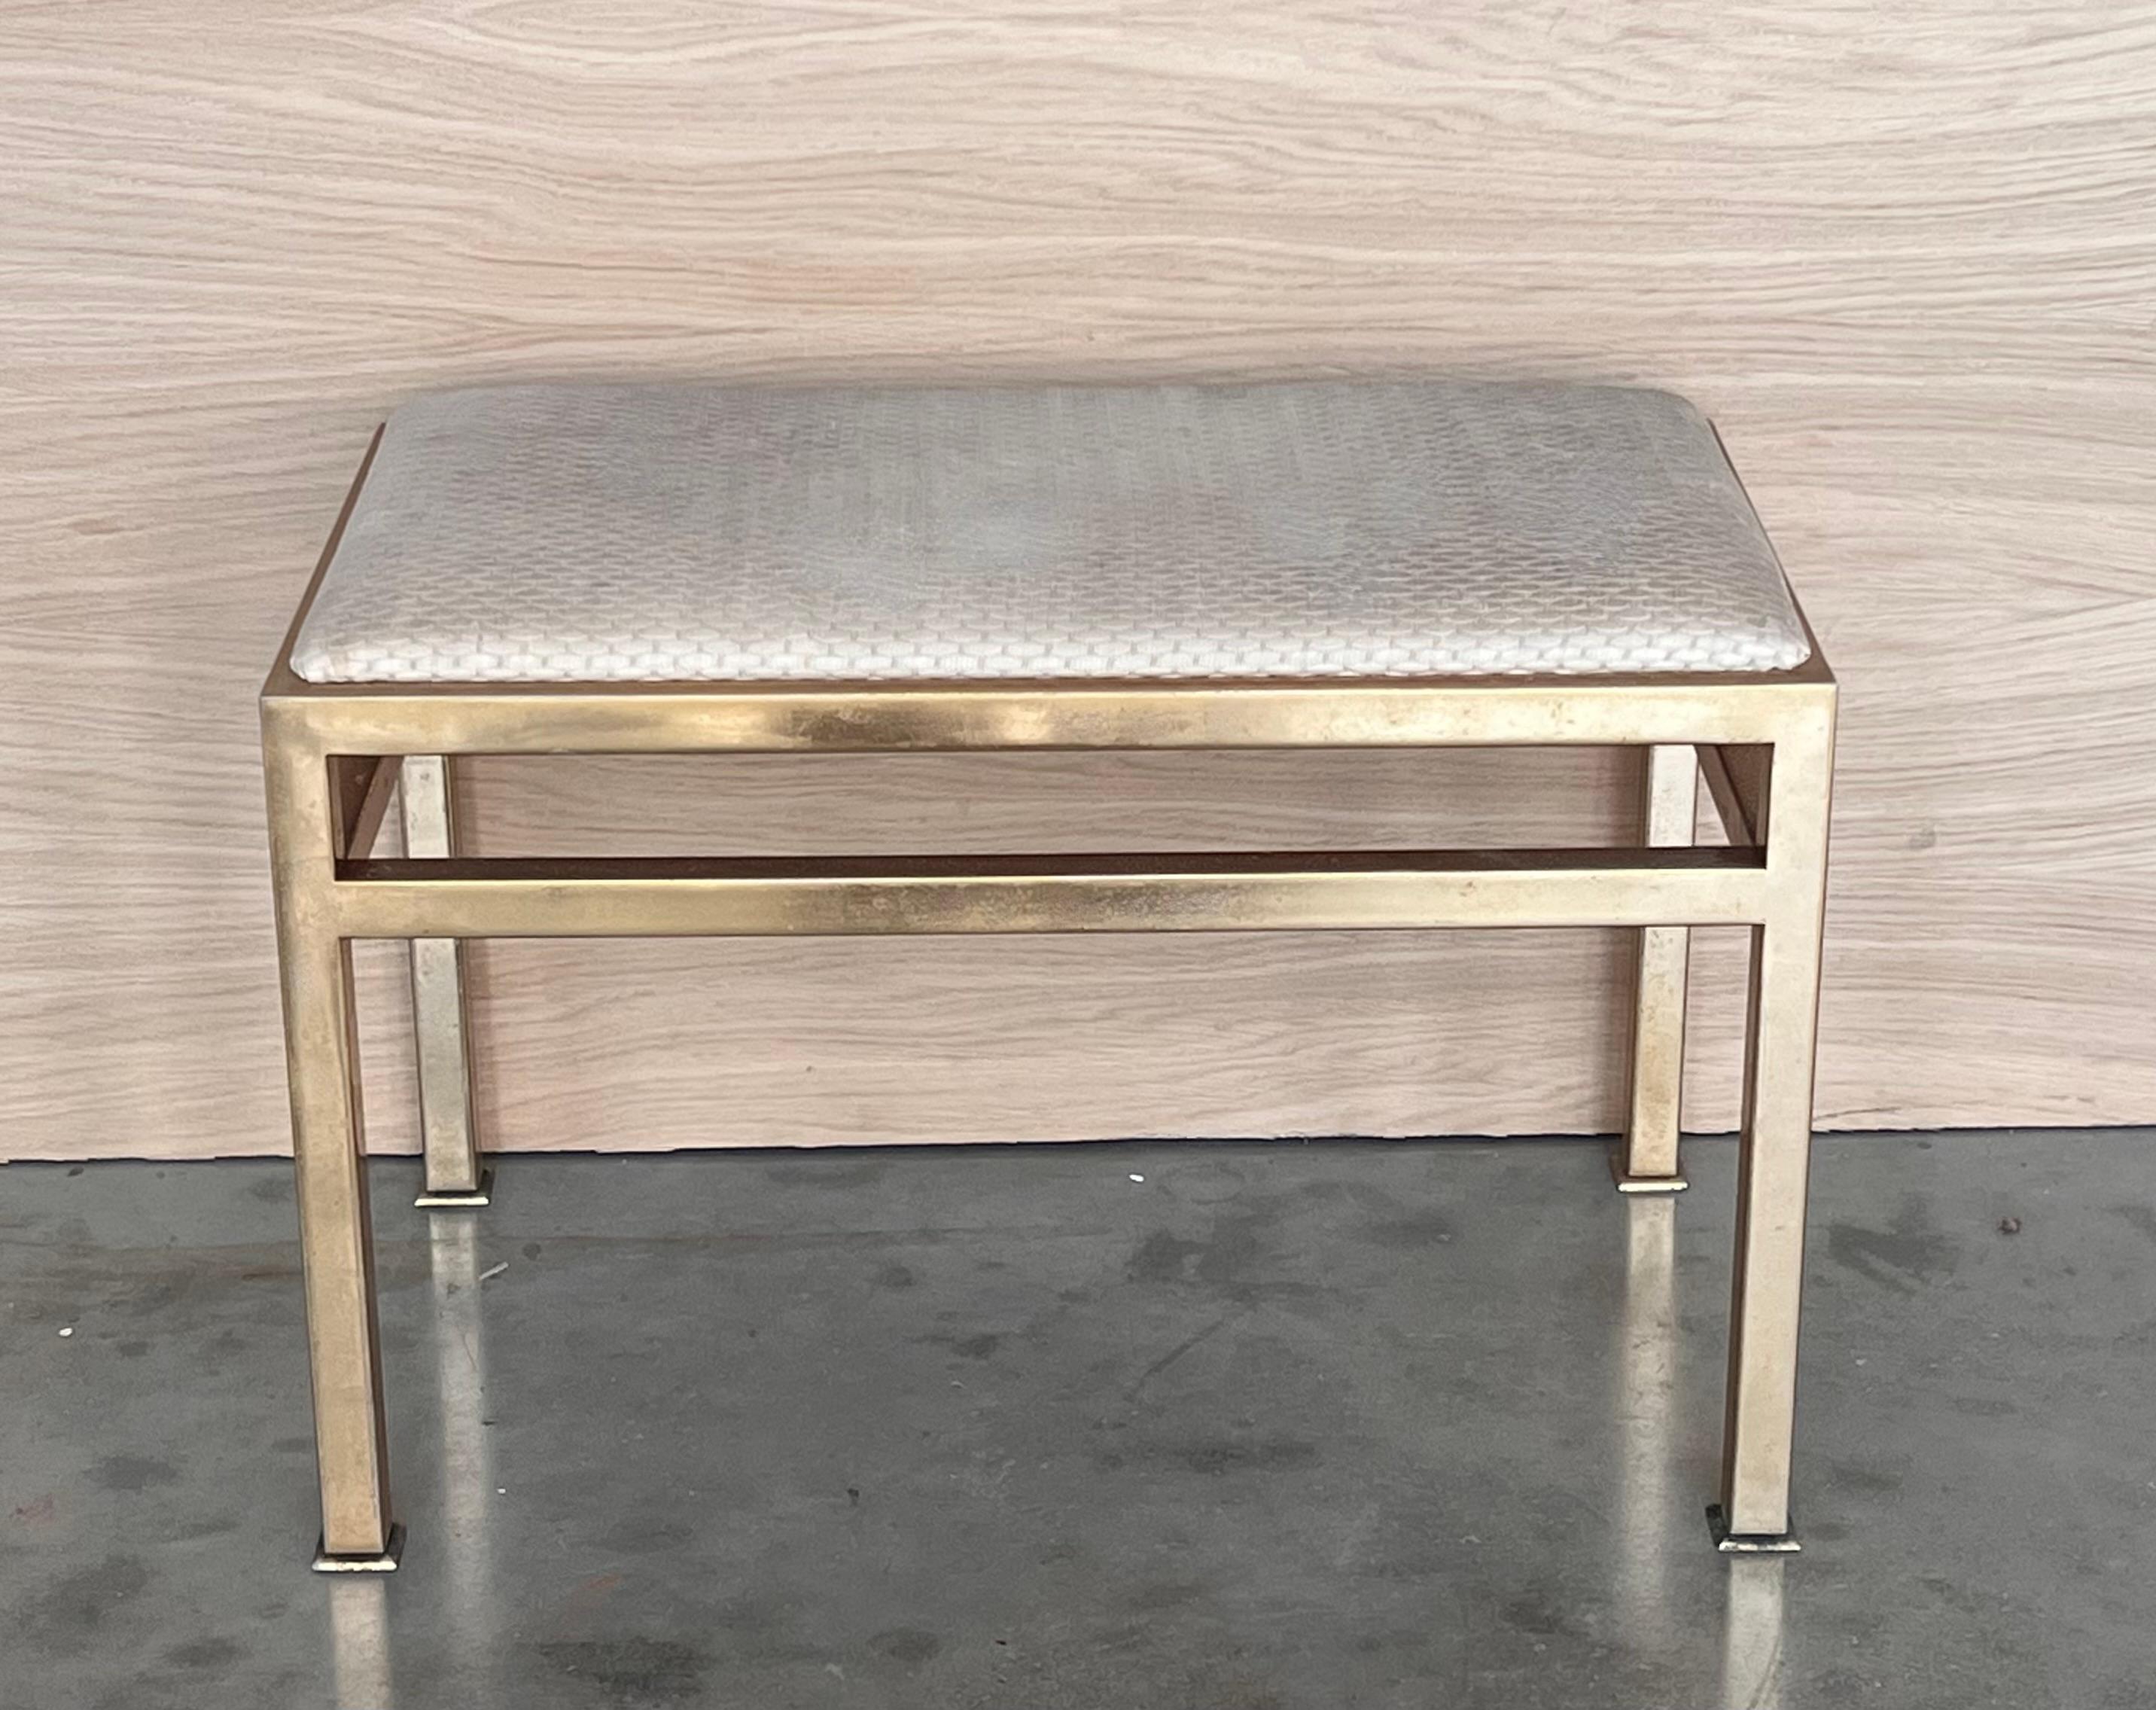 A 1970s modern brass bench or stool with upholstered seat cushion in the style of designer Paul Evans, circa 1970s.